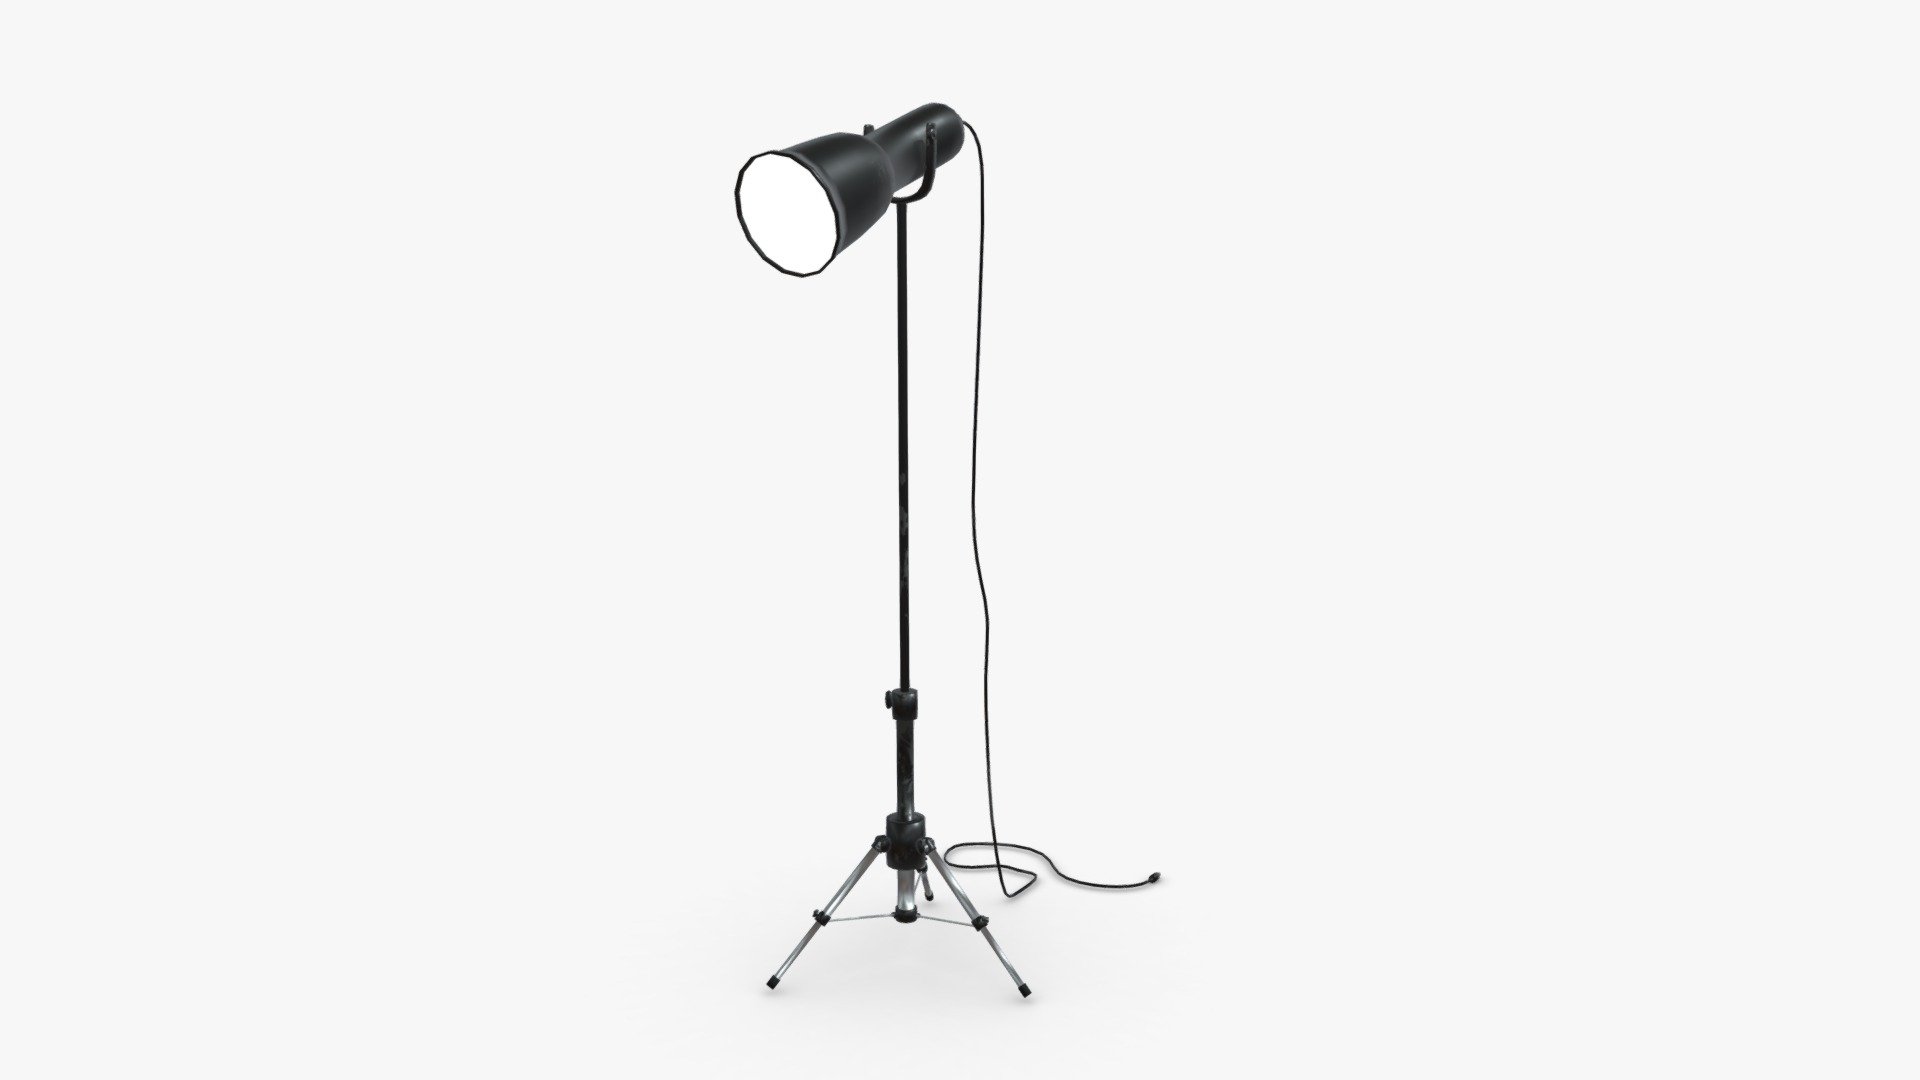 🙏 If you use these model for visual reference consider buying me a ☕ It would really help me out!  https://ko-fi.com/heledahn


This is a digital 3d model of a photography studio flash. 

This model can be used either as a background prop, or as a closeup prop due to its high detail and visual quality.

This product will achieve realistic results in your rendering projects and animations, being greatly suited for close-ups due to their high quality topology and PBR shading 3d model